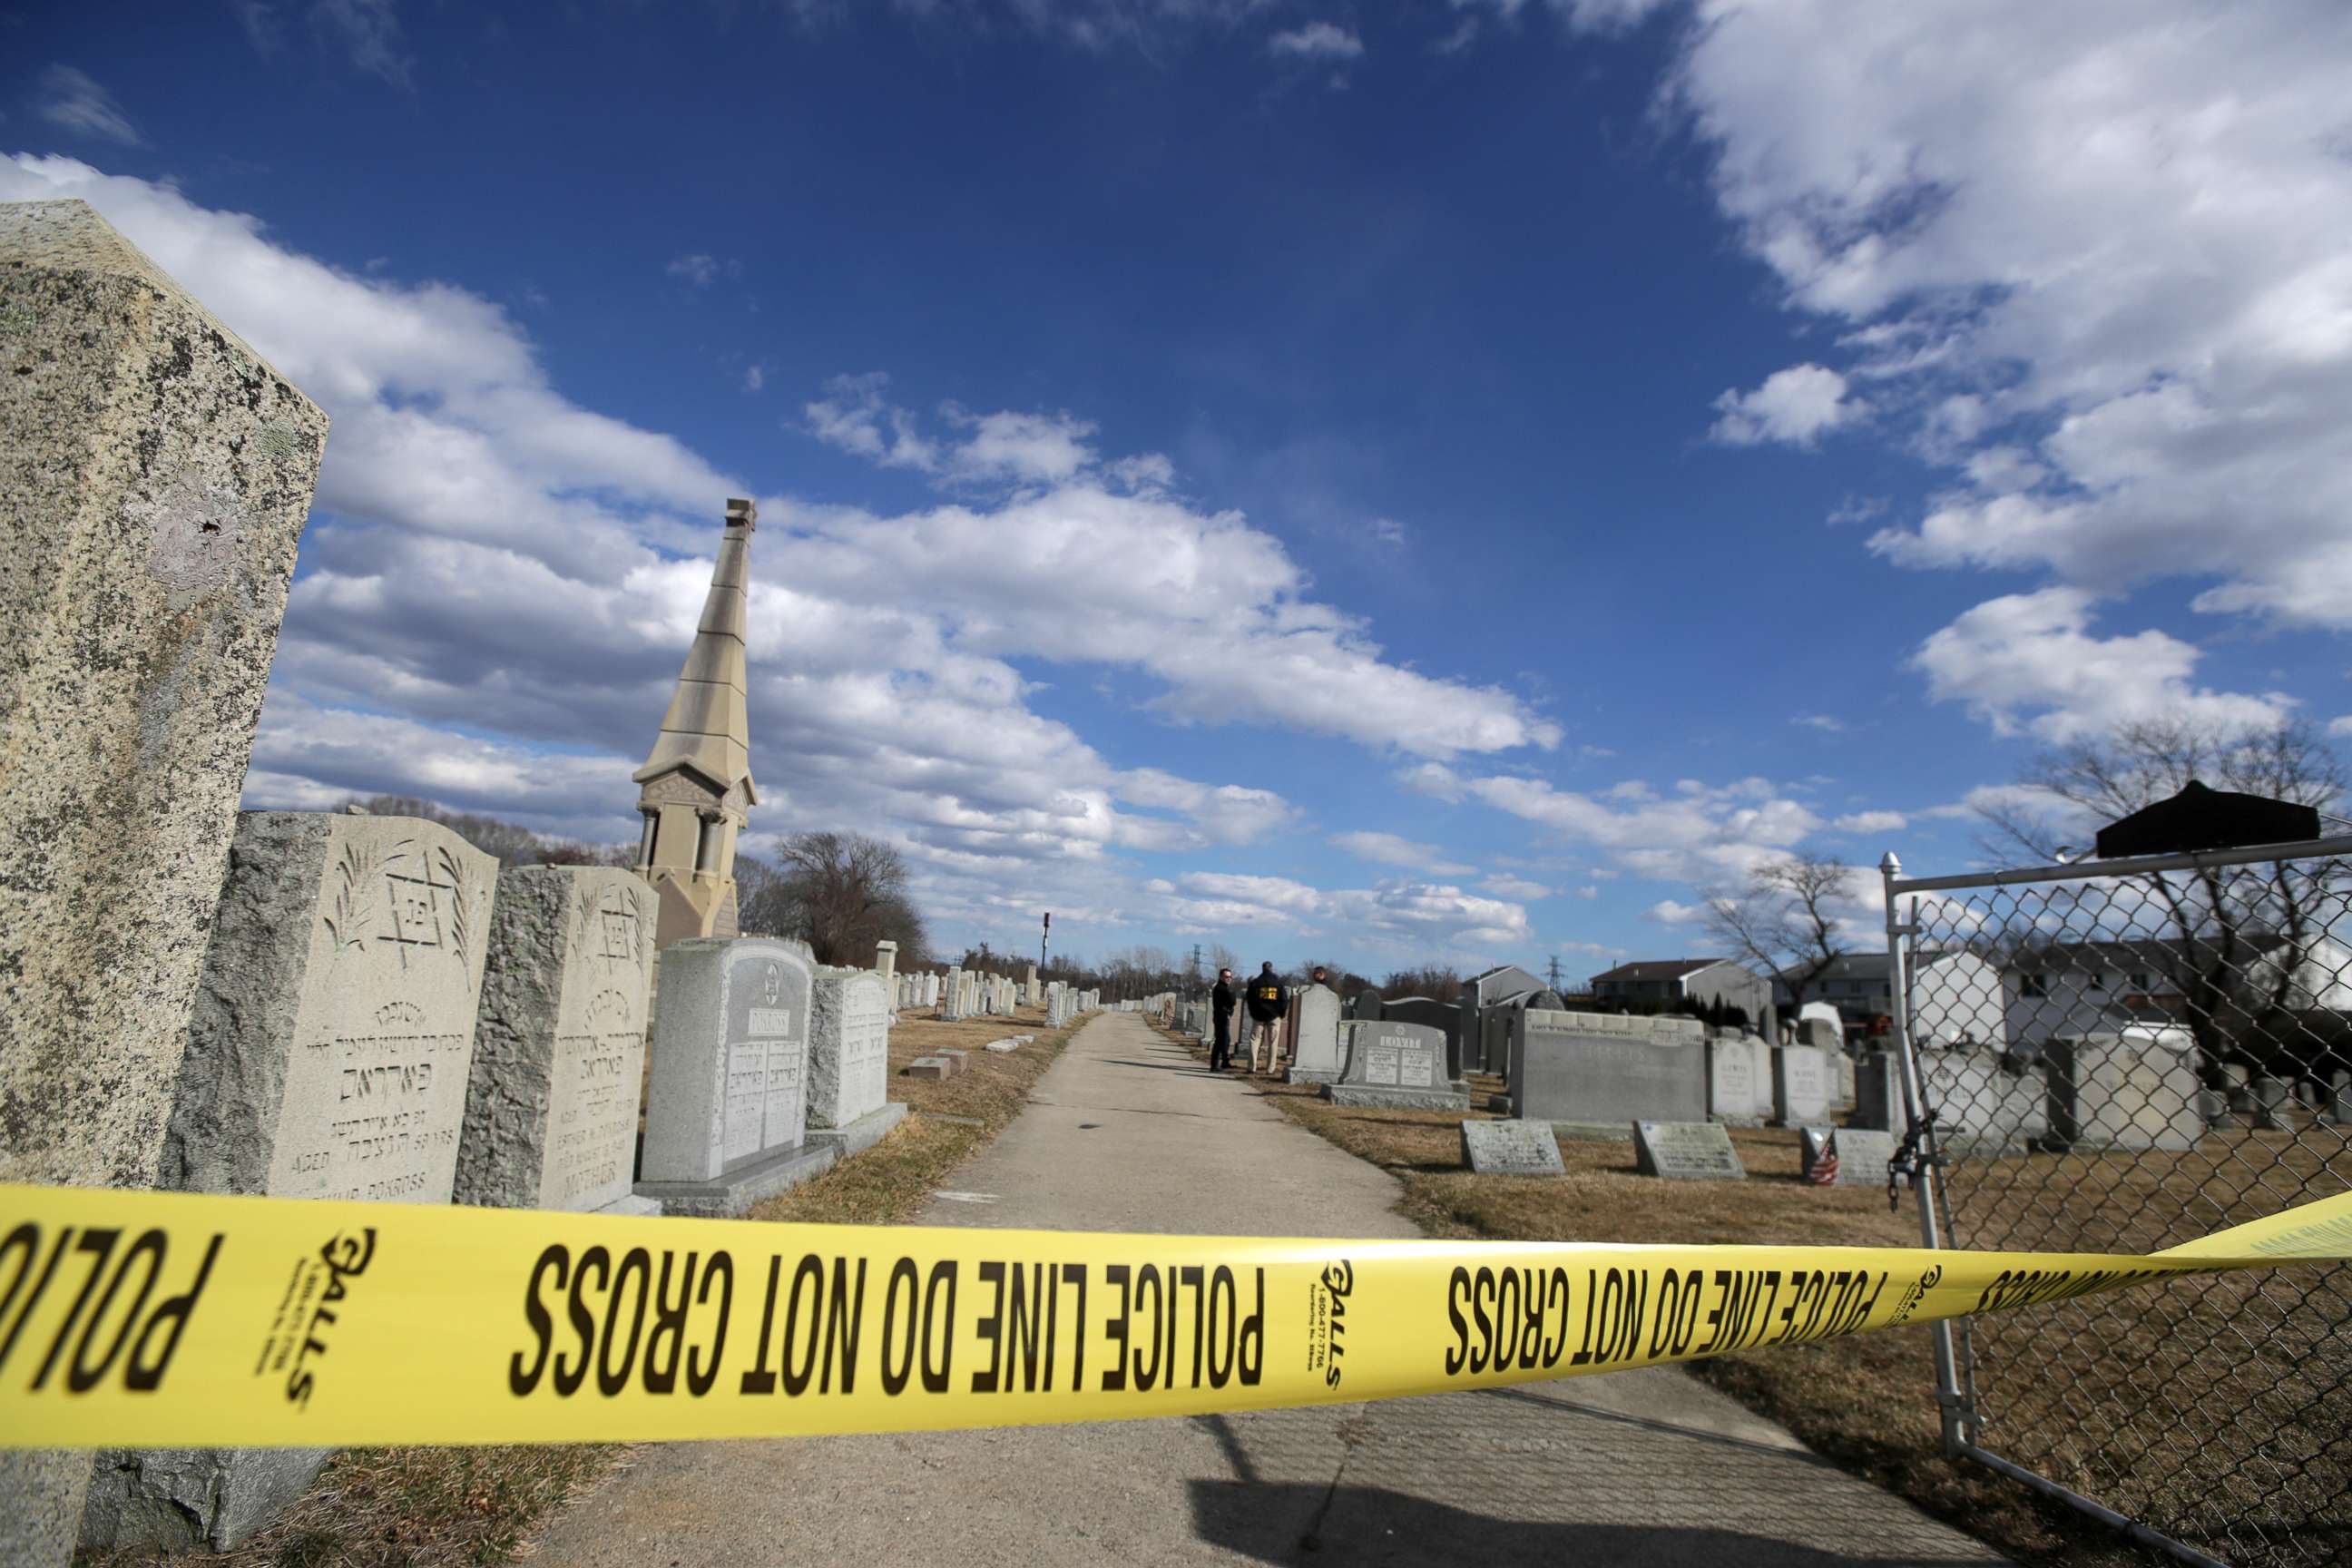 PHOTO: Police tape hangs in front of gravestones at the Hebrew Cemetery in Fall River, Mass., where markers were vandalized, March 19, 2019.